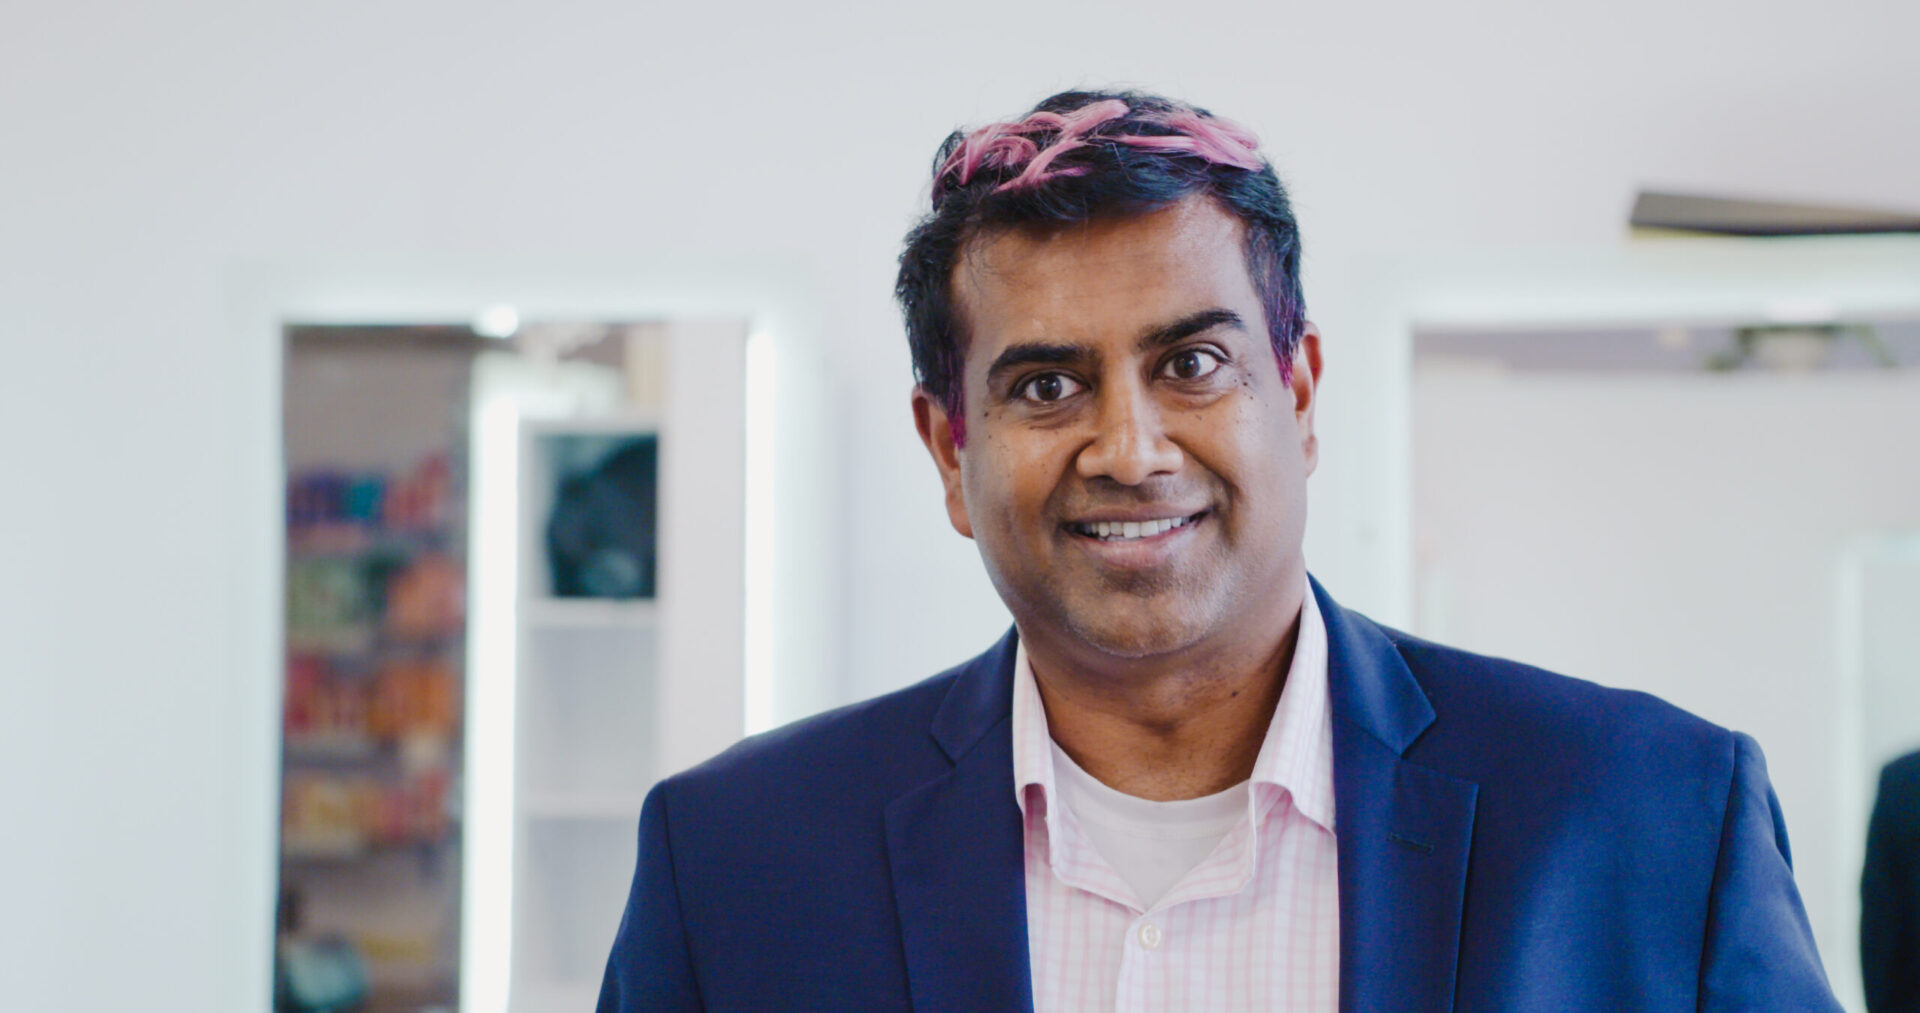 [CREDIT: CNE] Paari Gopalakrishnan, President and COO of Kent Hospital, made good on his promise to donors to the Breast Health Center to dye his hair pink.